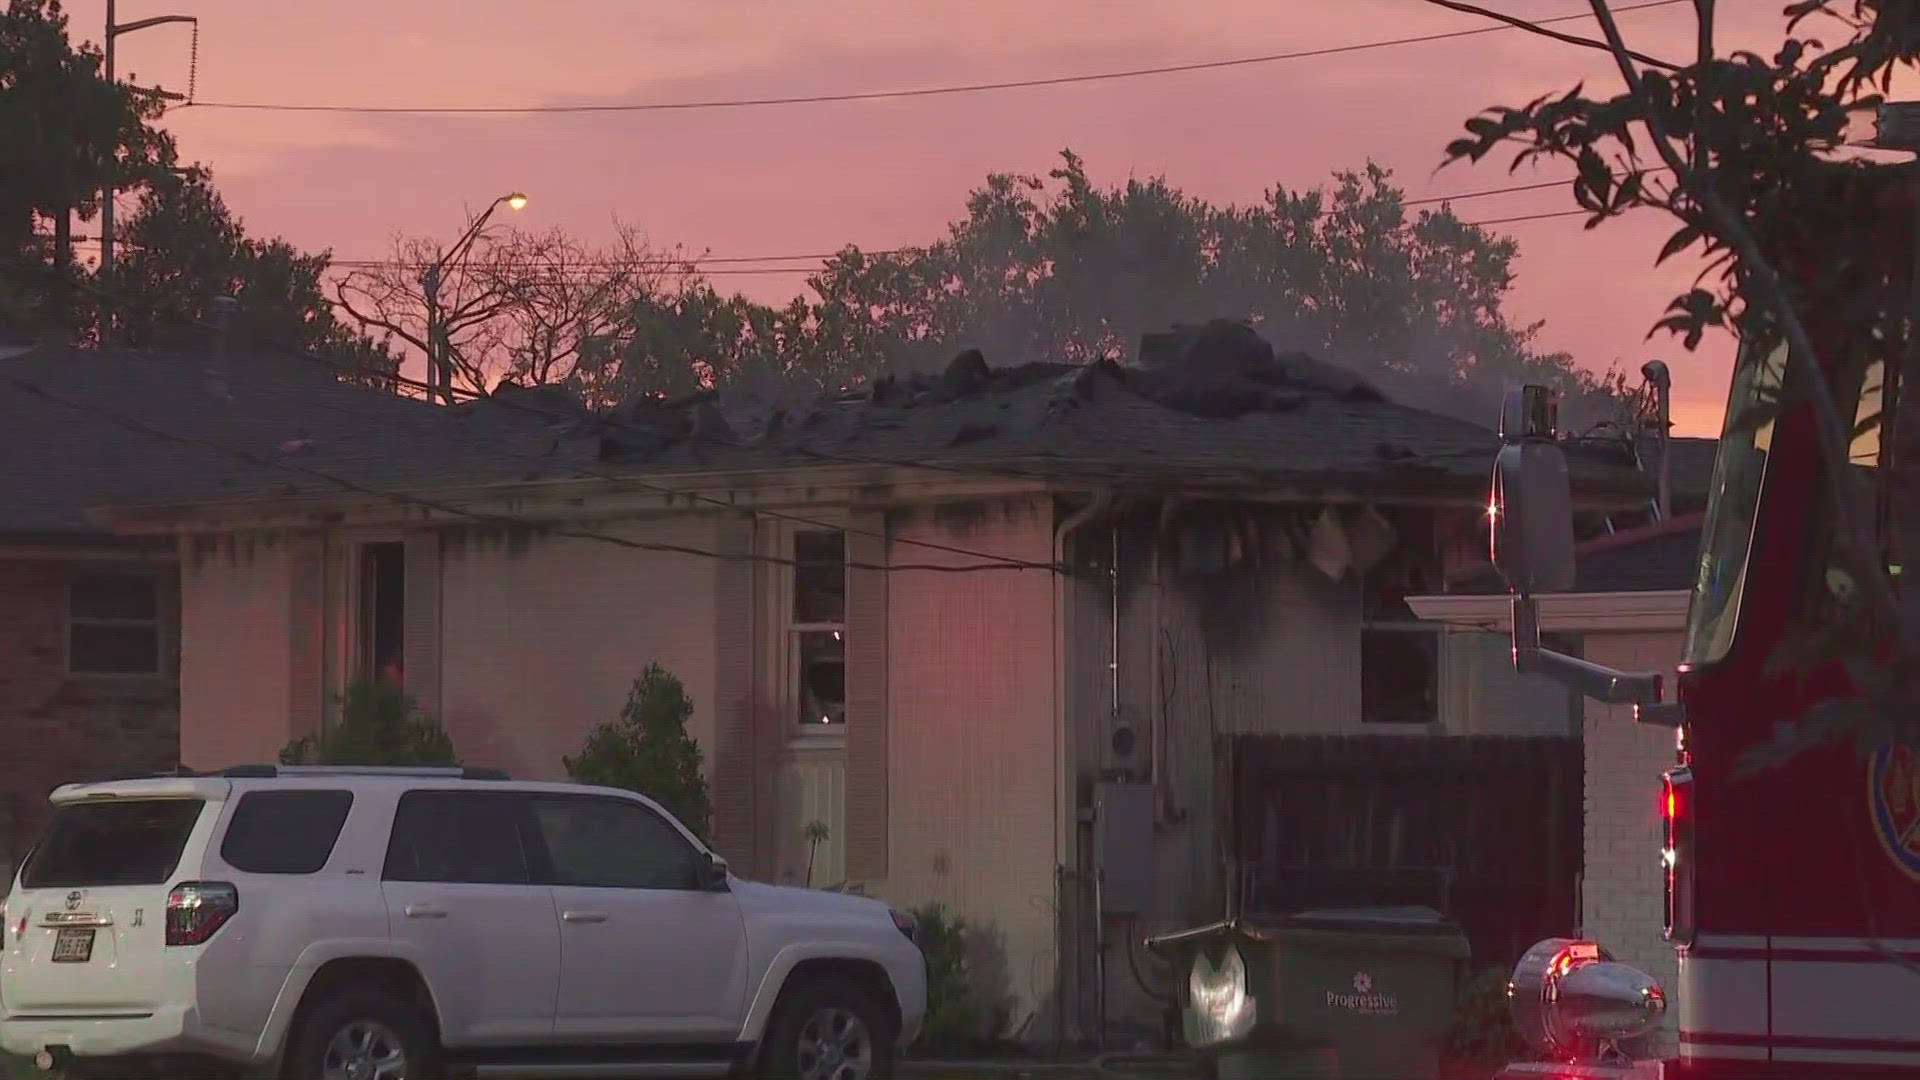 A house in Metairie which caught fire on Sunday, rekindled early Monday morning.